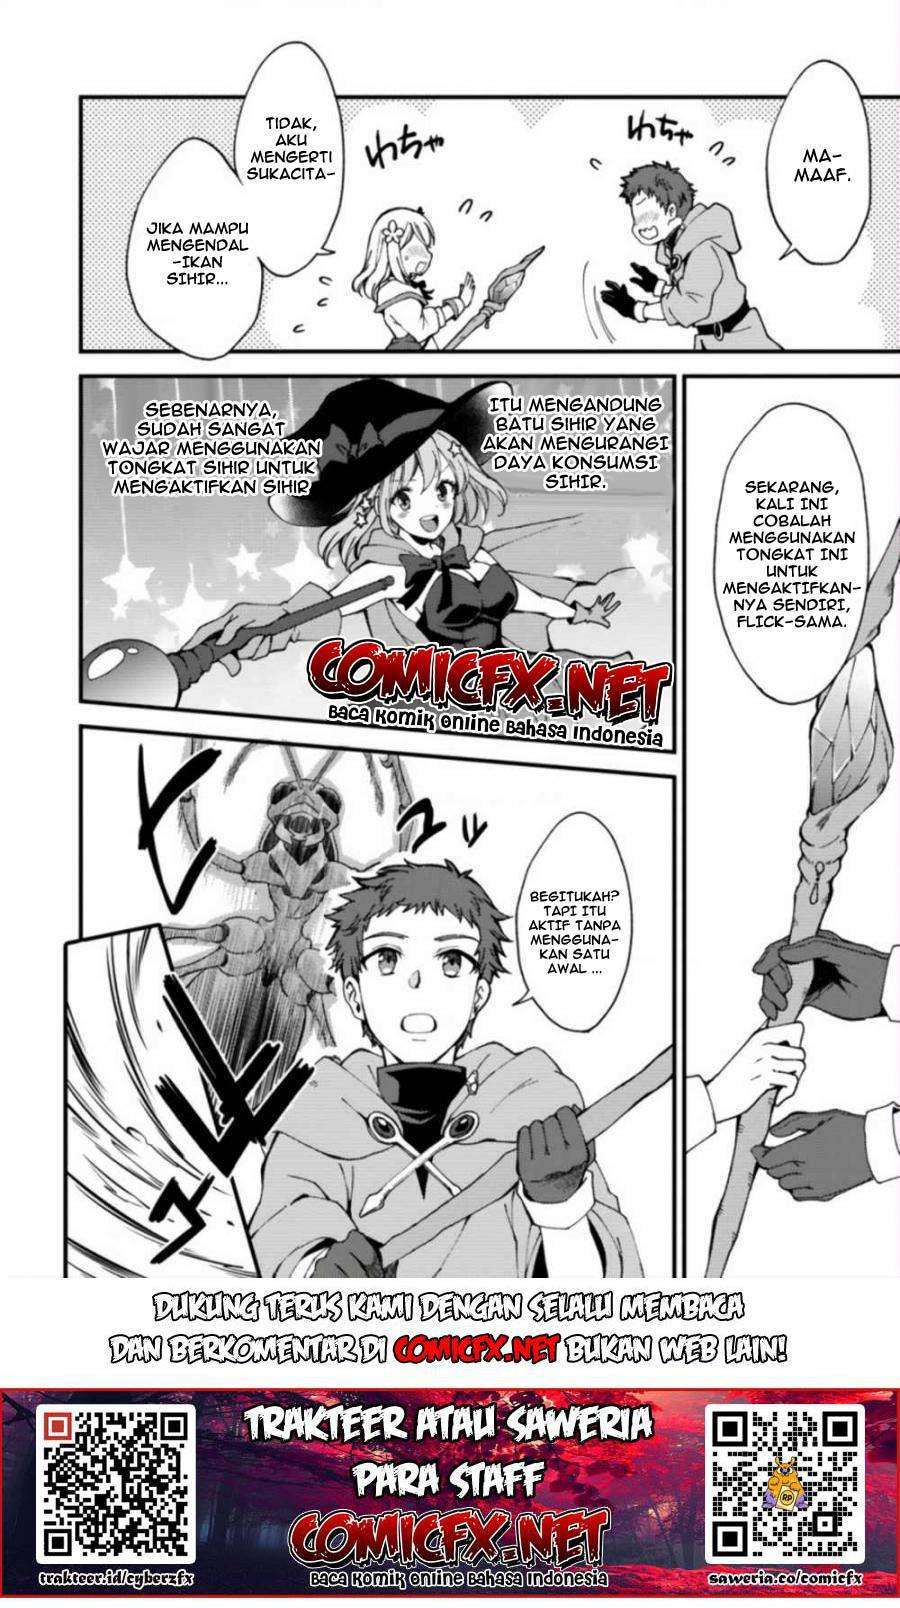 A Sword Master Childhood Friend Power Harassed Me Harshly, So I Broke off Our Relationship and Make a Fresh Start at the Frontier as a Magic Swordsman Chapter 4.2